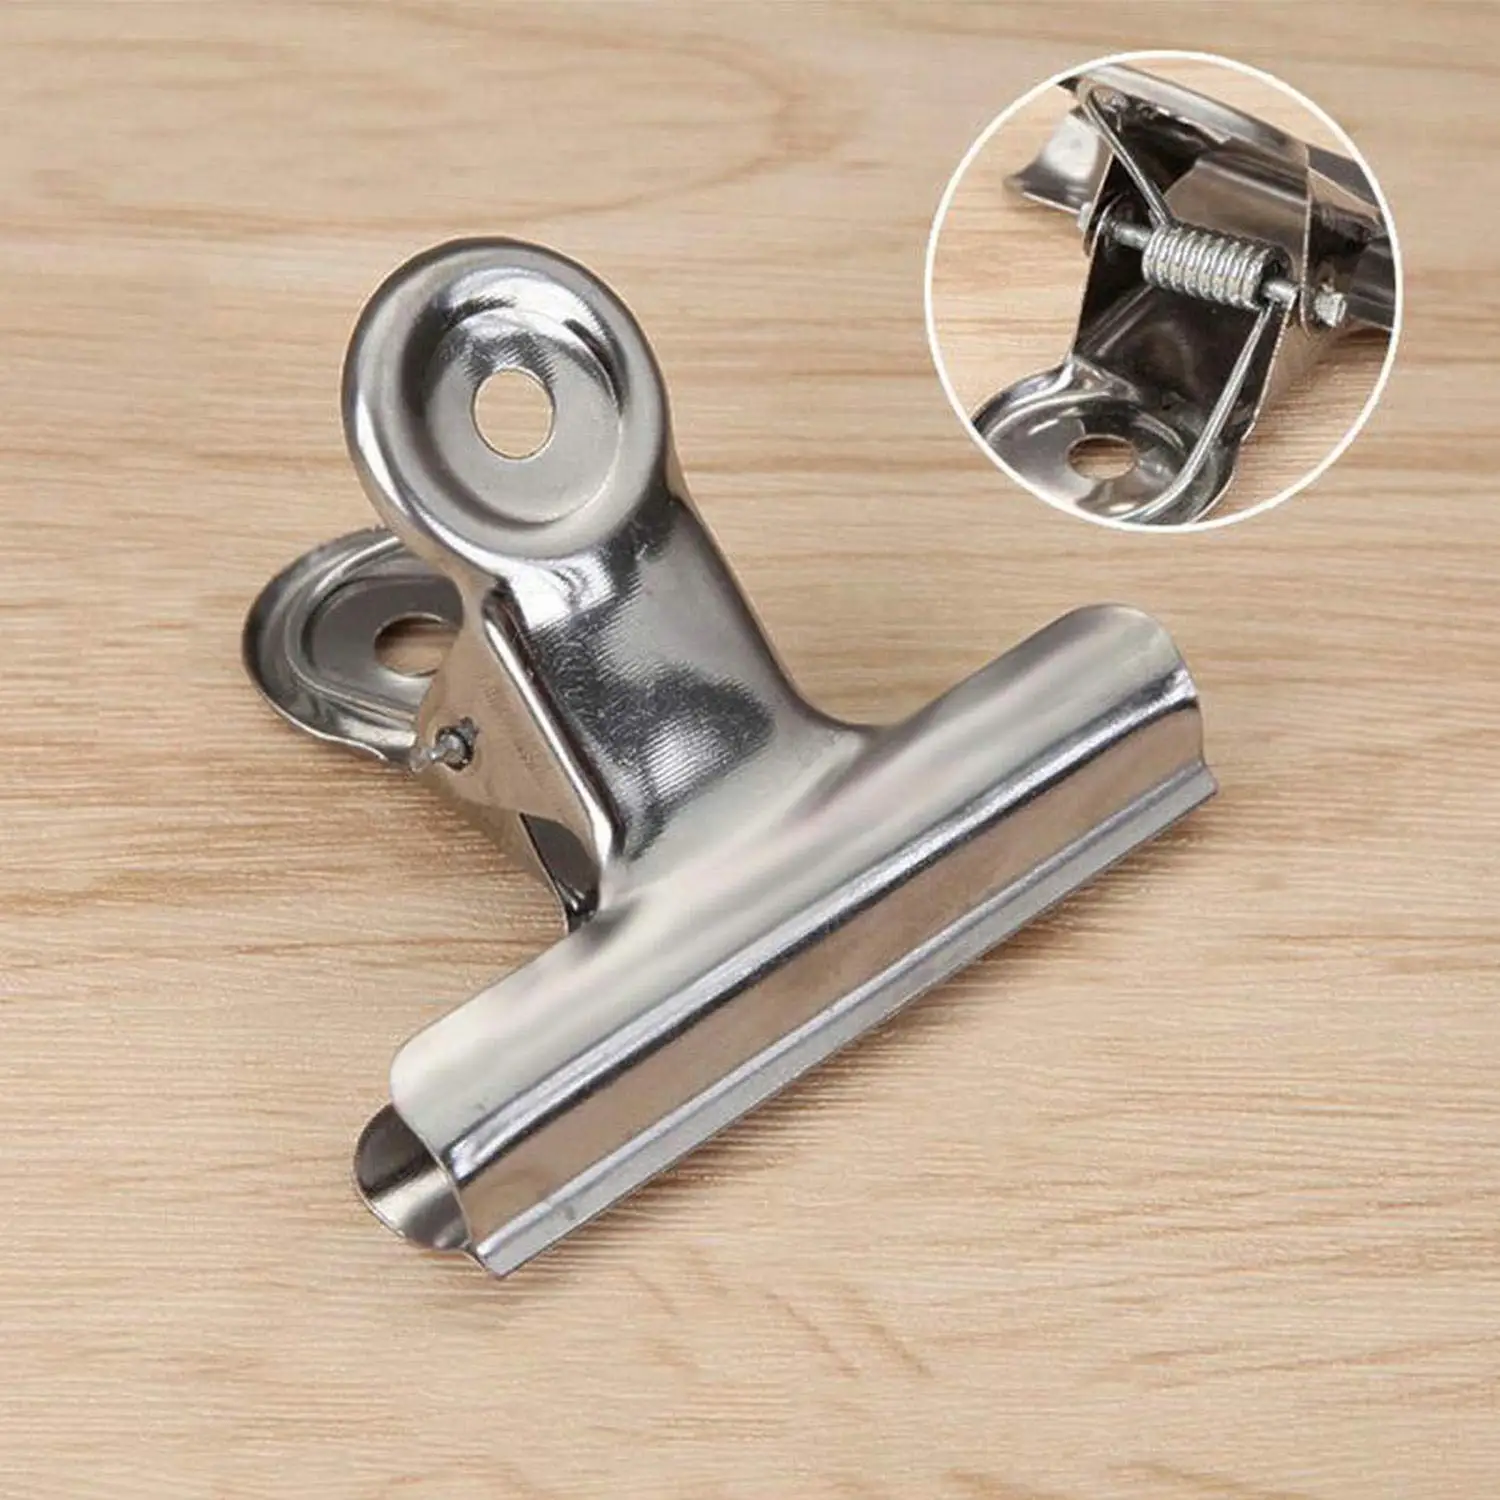 Bag Clips Food Clips 3 Sizes 18 Pack, Heavy Duty Stainless Steel Clips for Bag